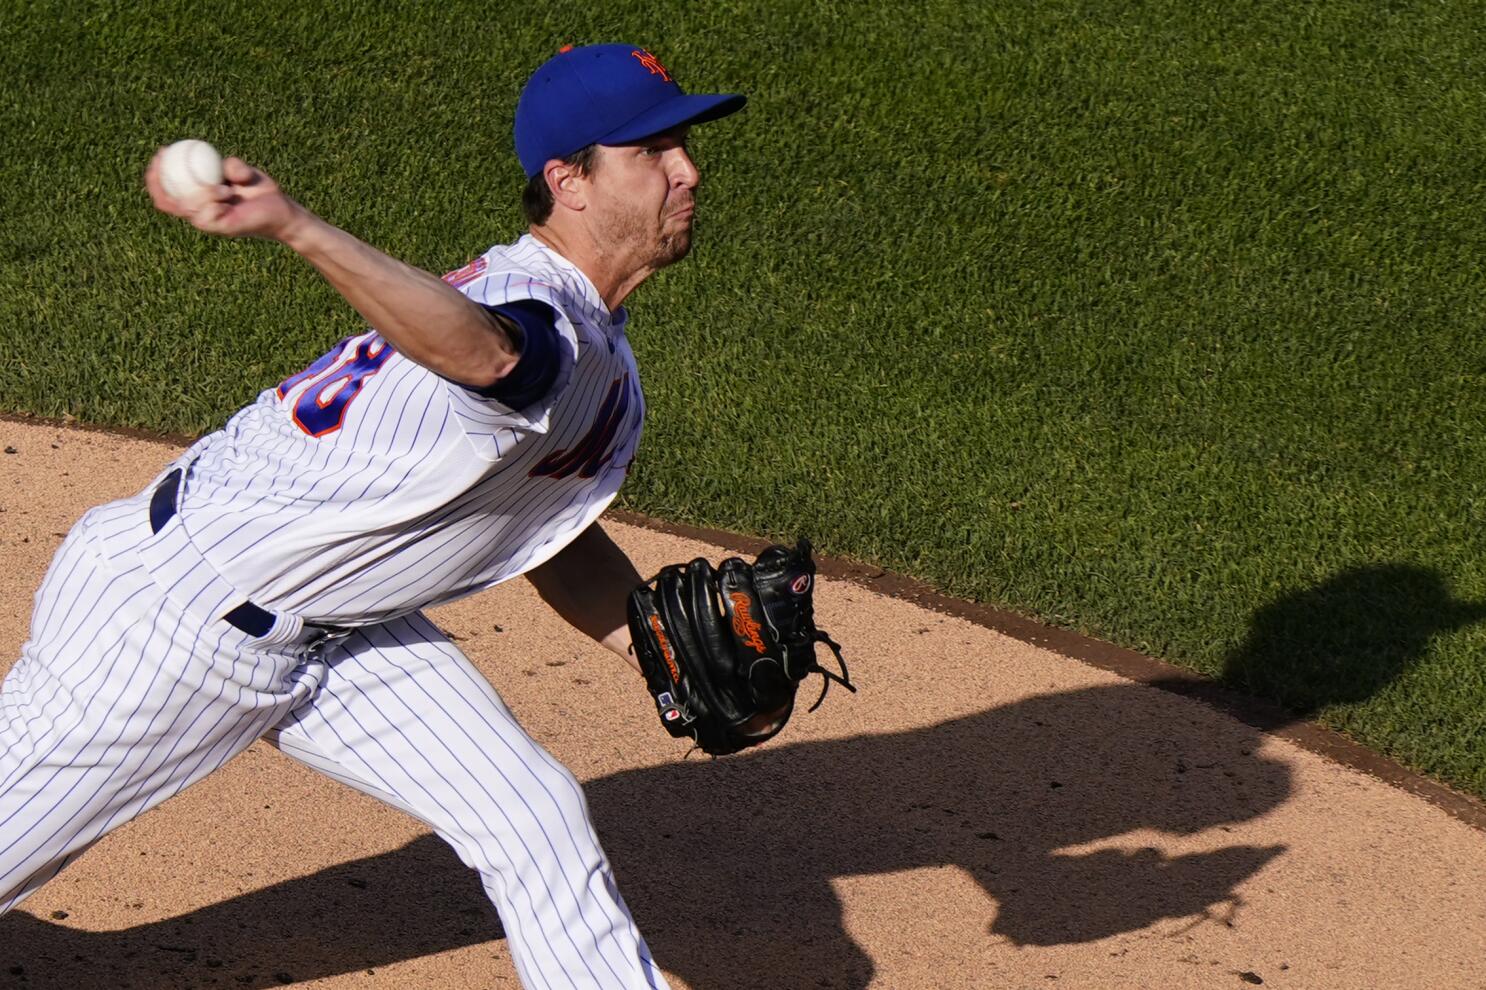 This Week in Mets: No, really, can Jacob deGrom challenge Bob